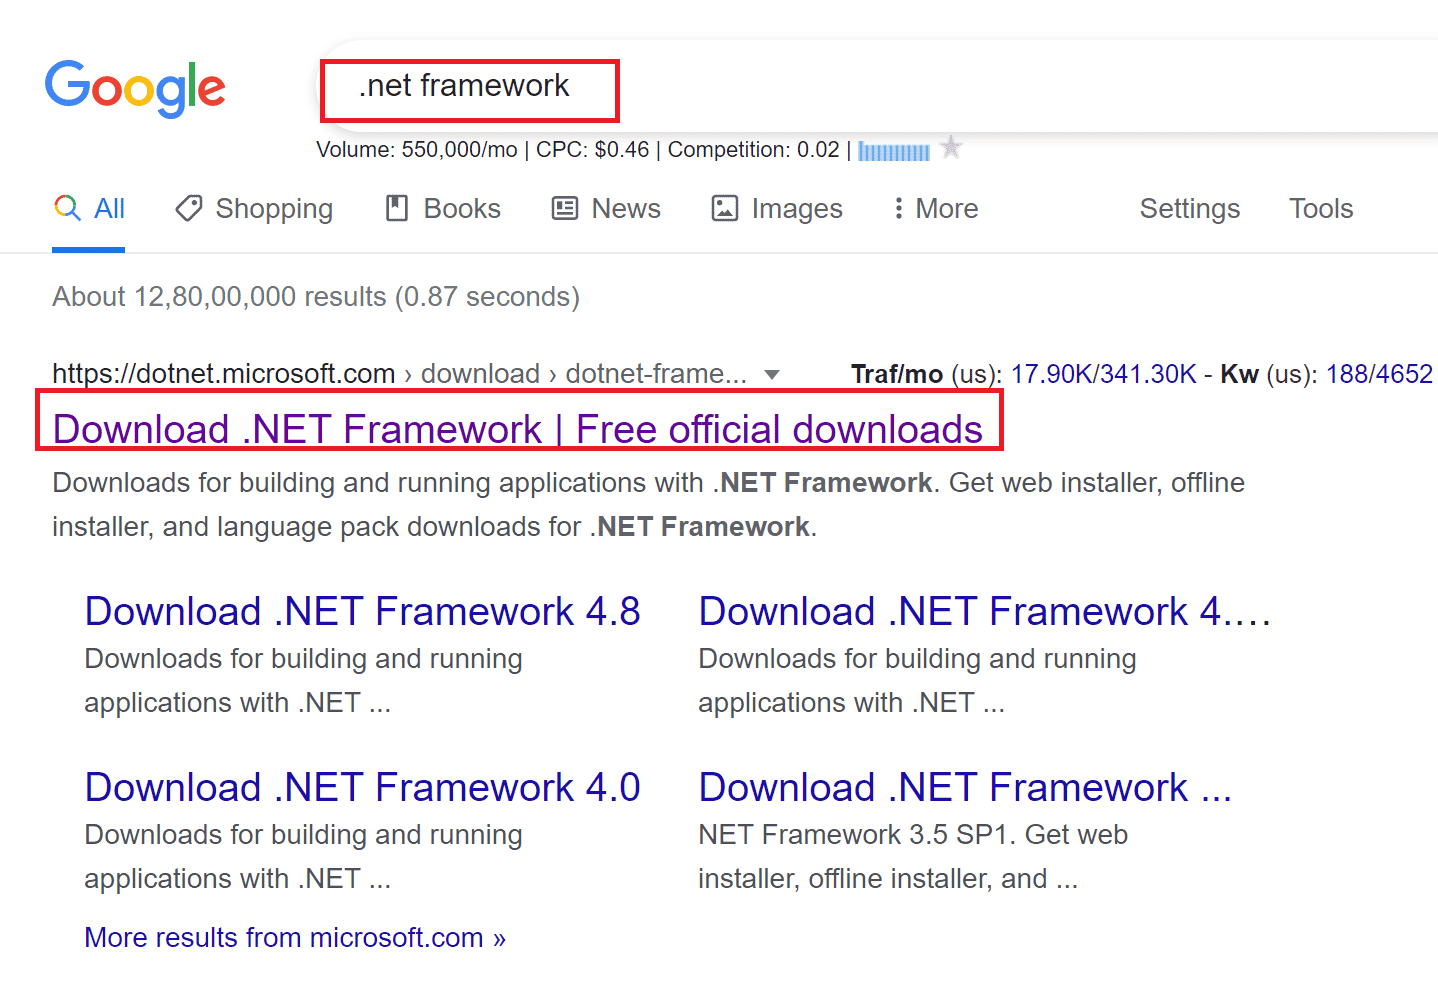 click on the first search result from Microsoft official website titled Download .NET Framework 